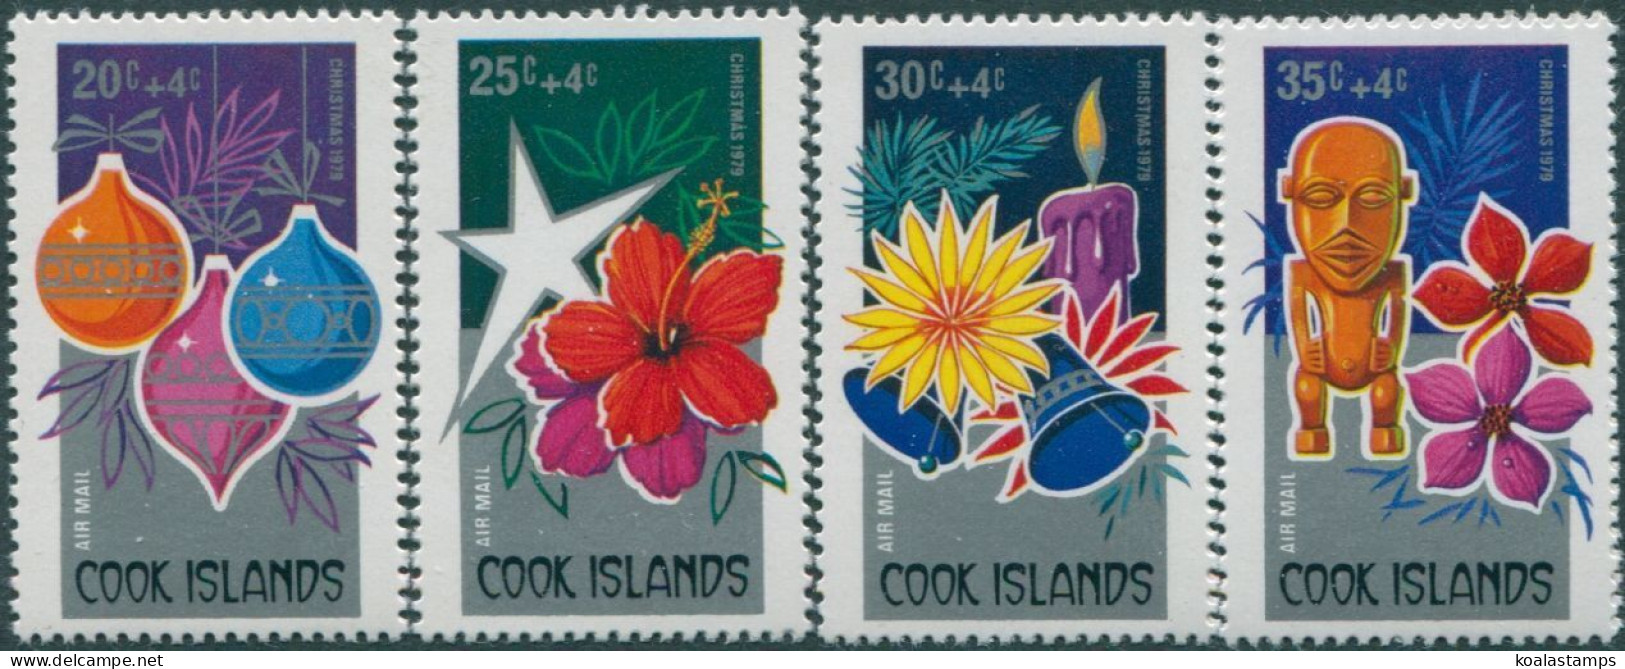 Cook Islands 1979 SG671-674 Christmas Airmail Surcharges Set MNH - Cook